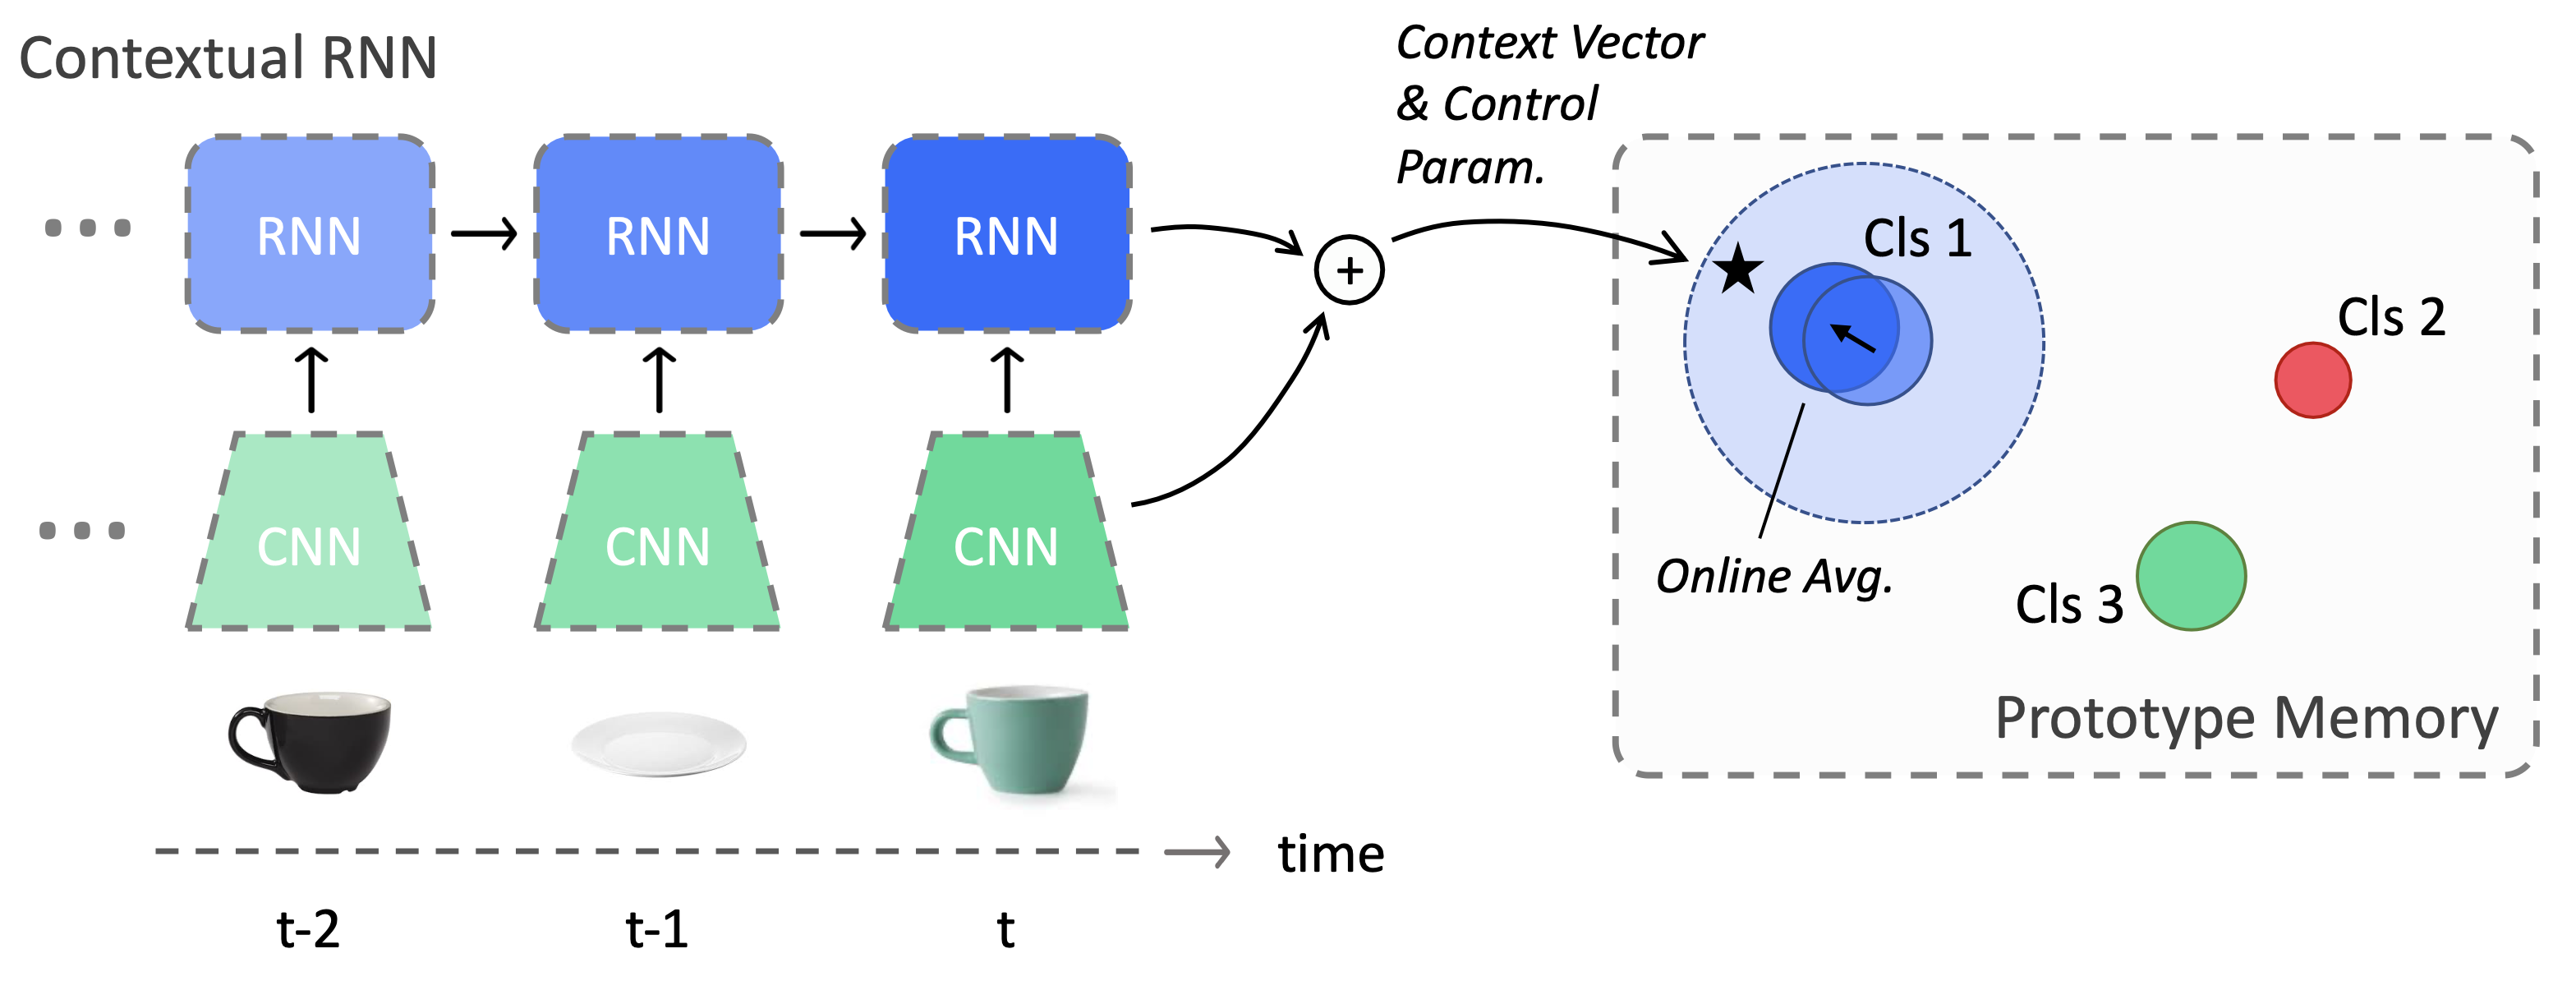  Temporal contextual features are extracted
from an RNN. The prototype memory stores one vector per class and does online averaging.
Examples falling outside the radii of all prototypes are classified as “new.” 